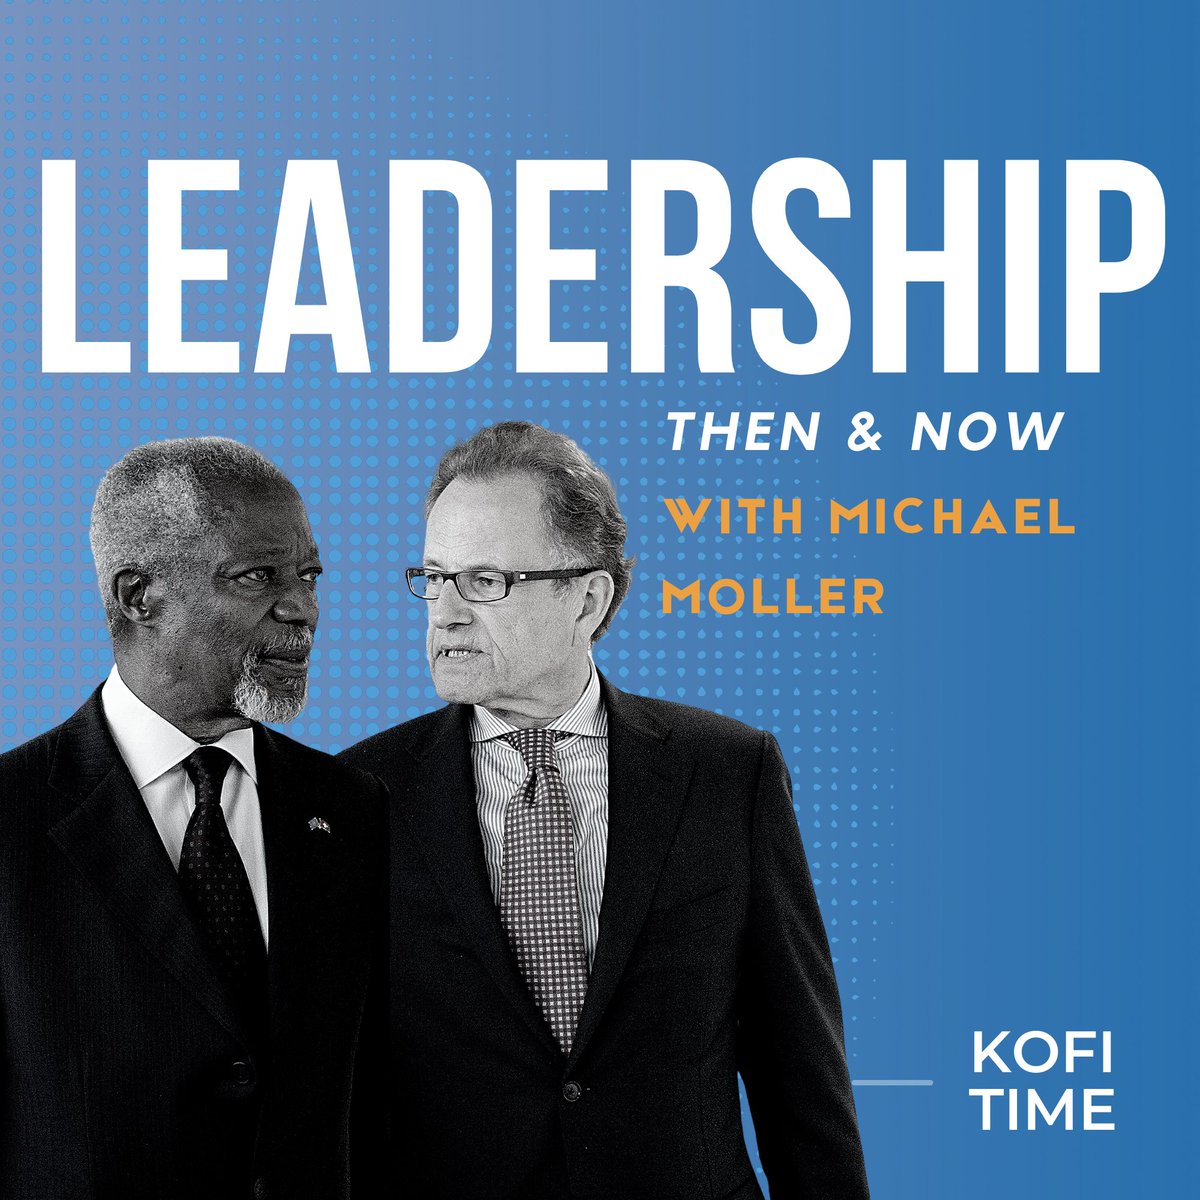 What drove Kofi Annan, and how can we emulate his leadership style to face today’s global challenges? Discover Kofi Annan's unique leadership with @michaelmoller on Kofi Time podcast Ep. 5: bit.ly/kofitime5 Remember his vision & empathy on Kofi Annan's 86th birthday.…